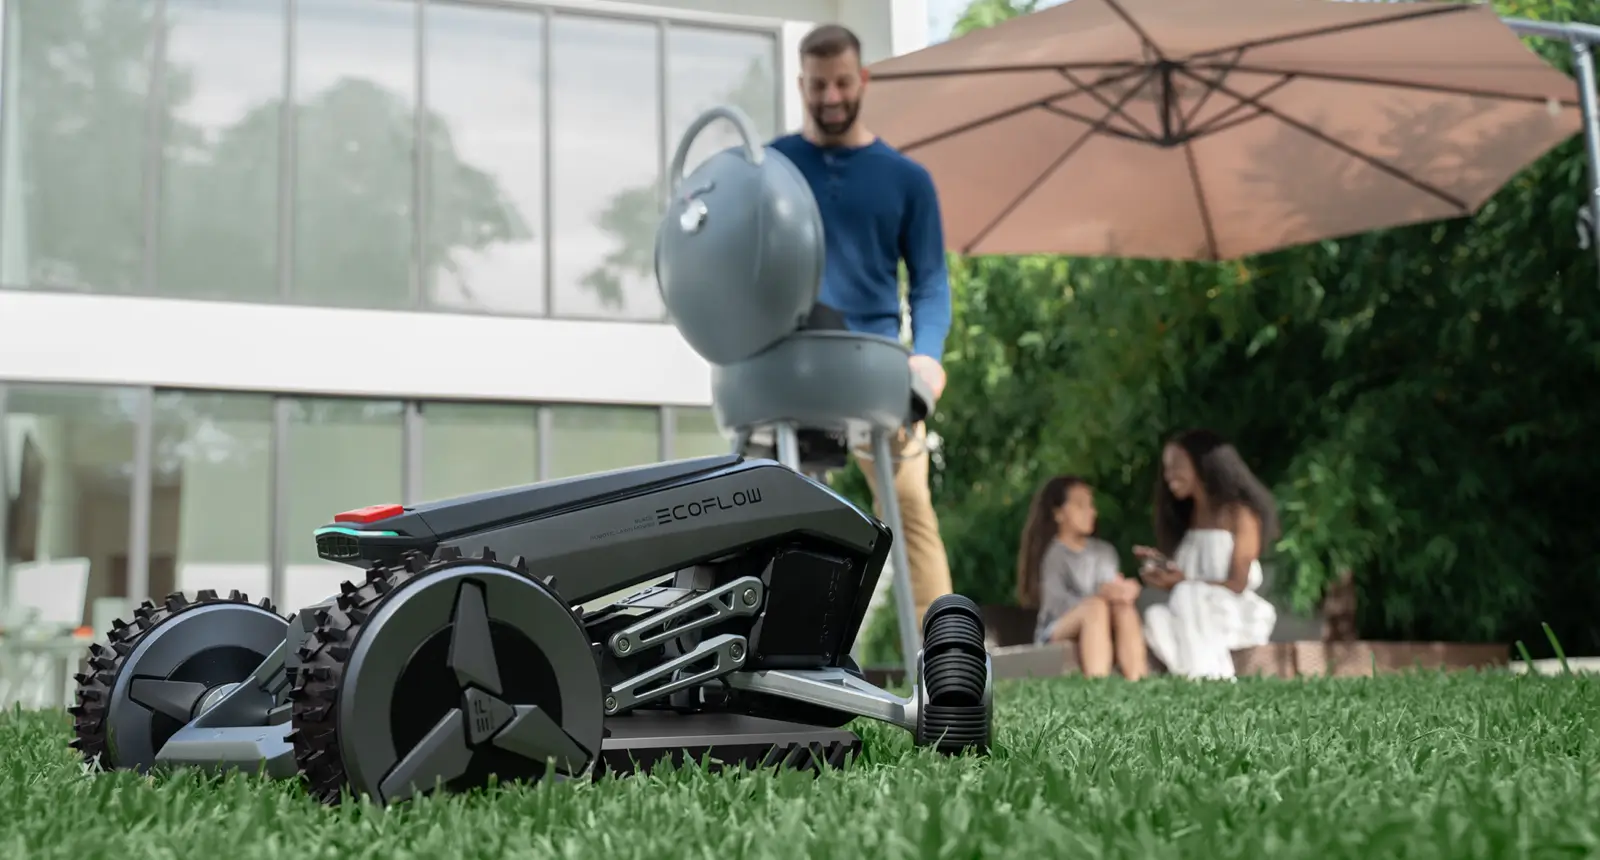 Grisling metal daytime What Is the Best Robotic Lawn Mower for You?